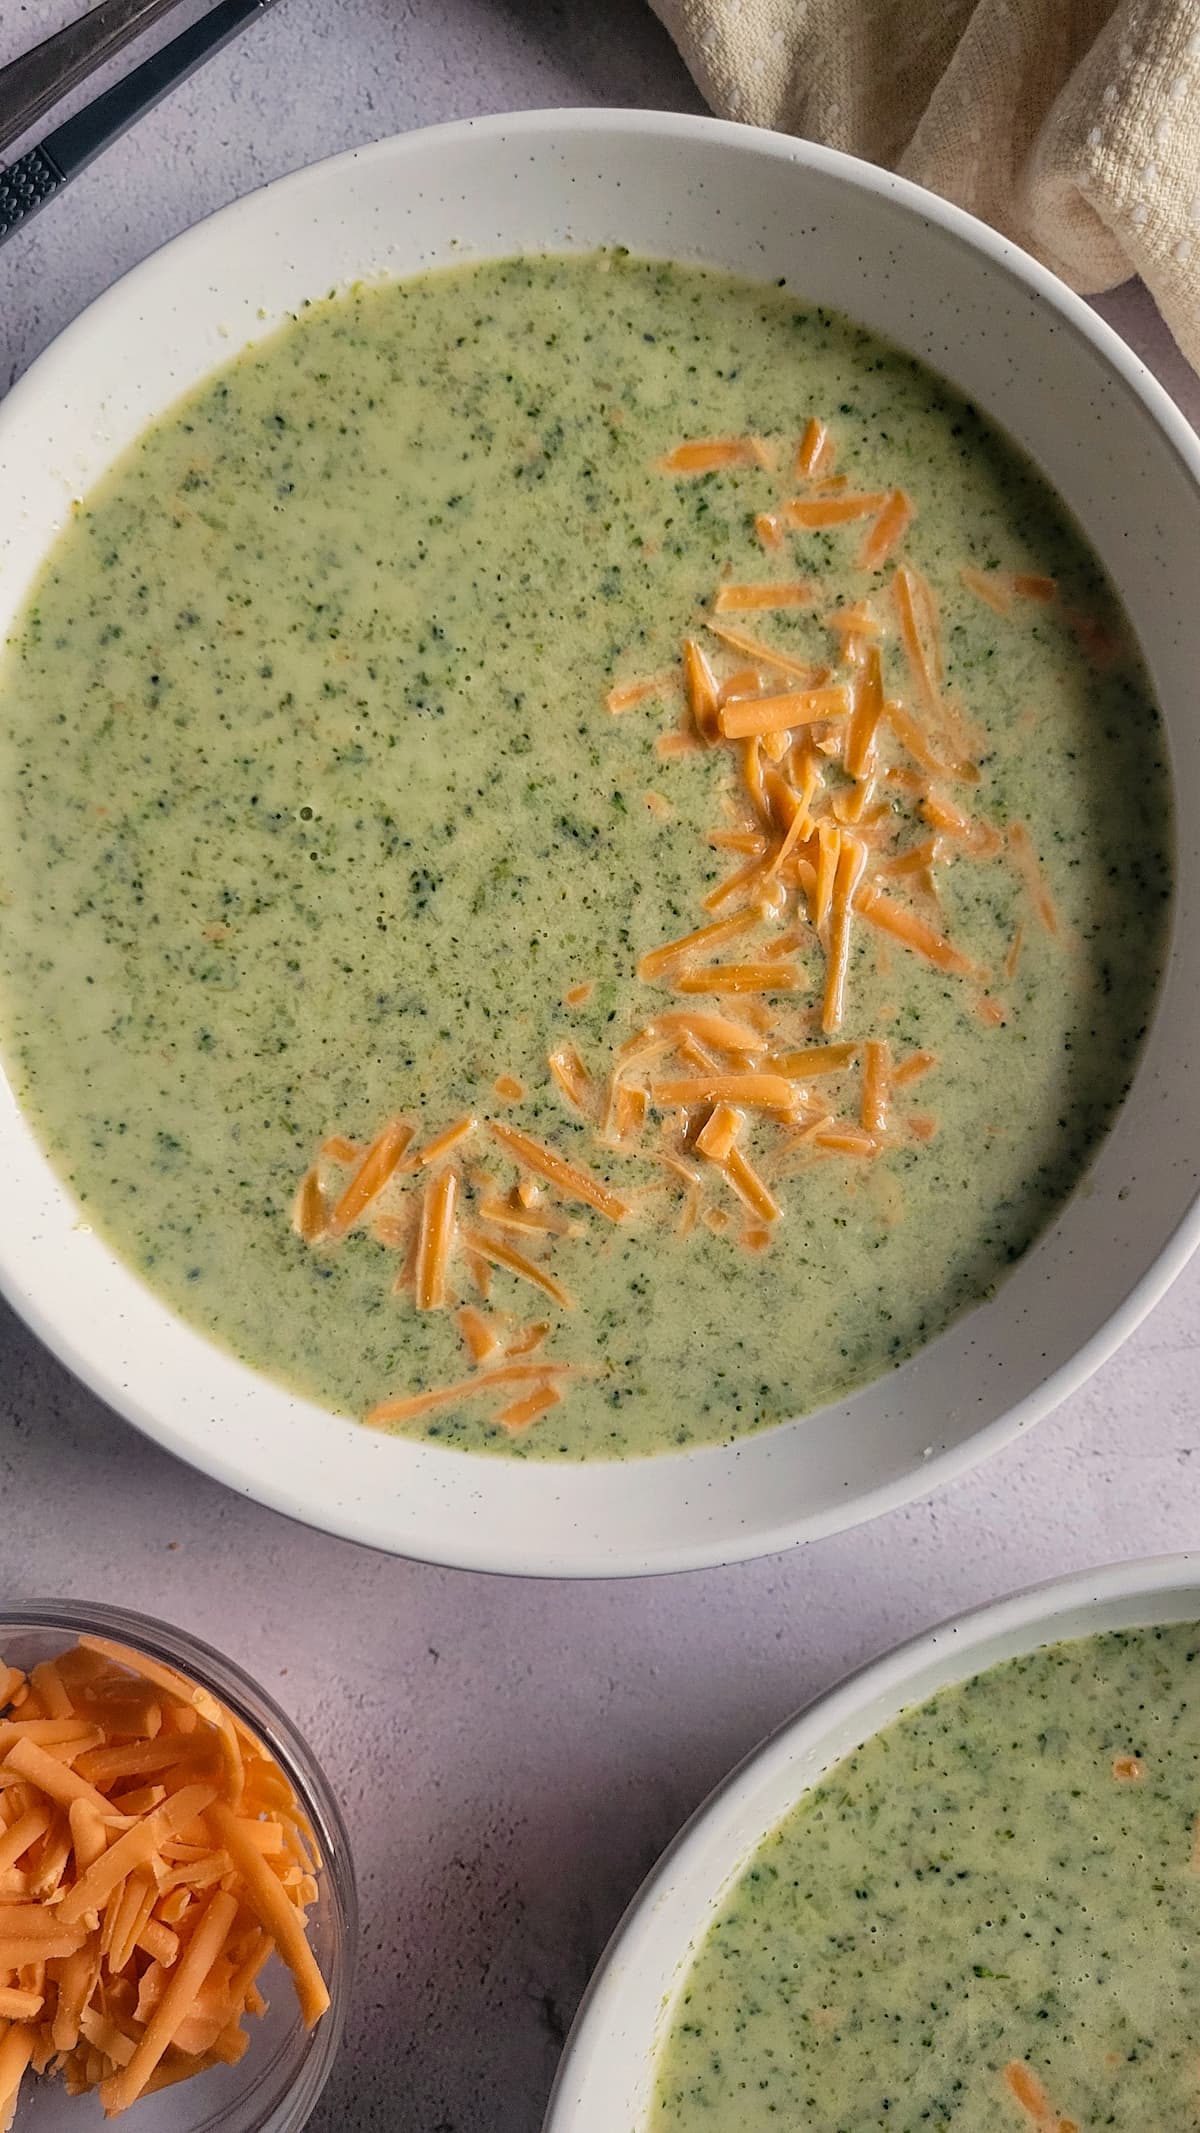 bowl of broccoli & cheese soup next to another bowl of it and a bowl of shredded cheddar